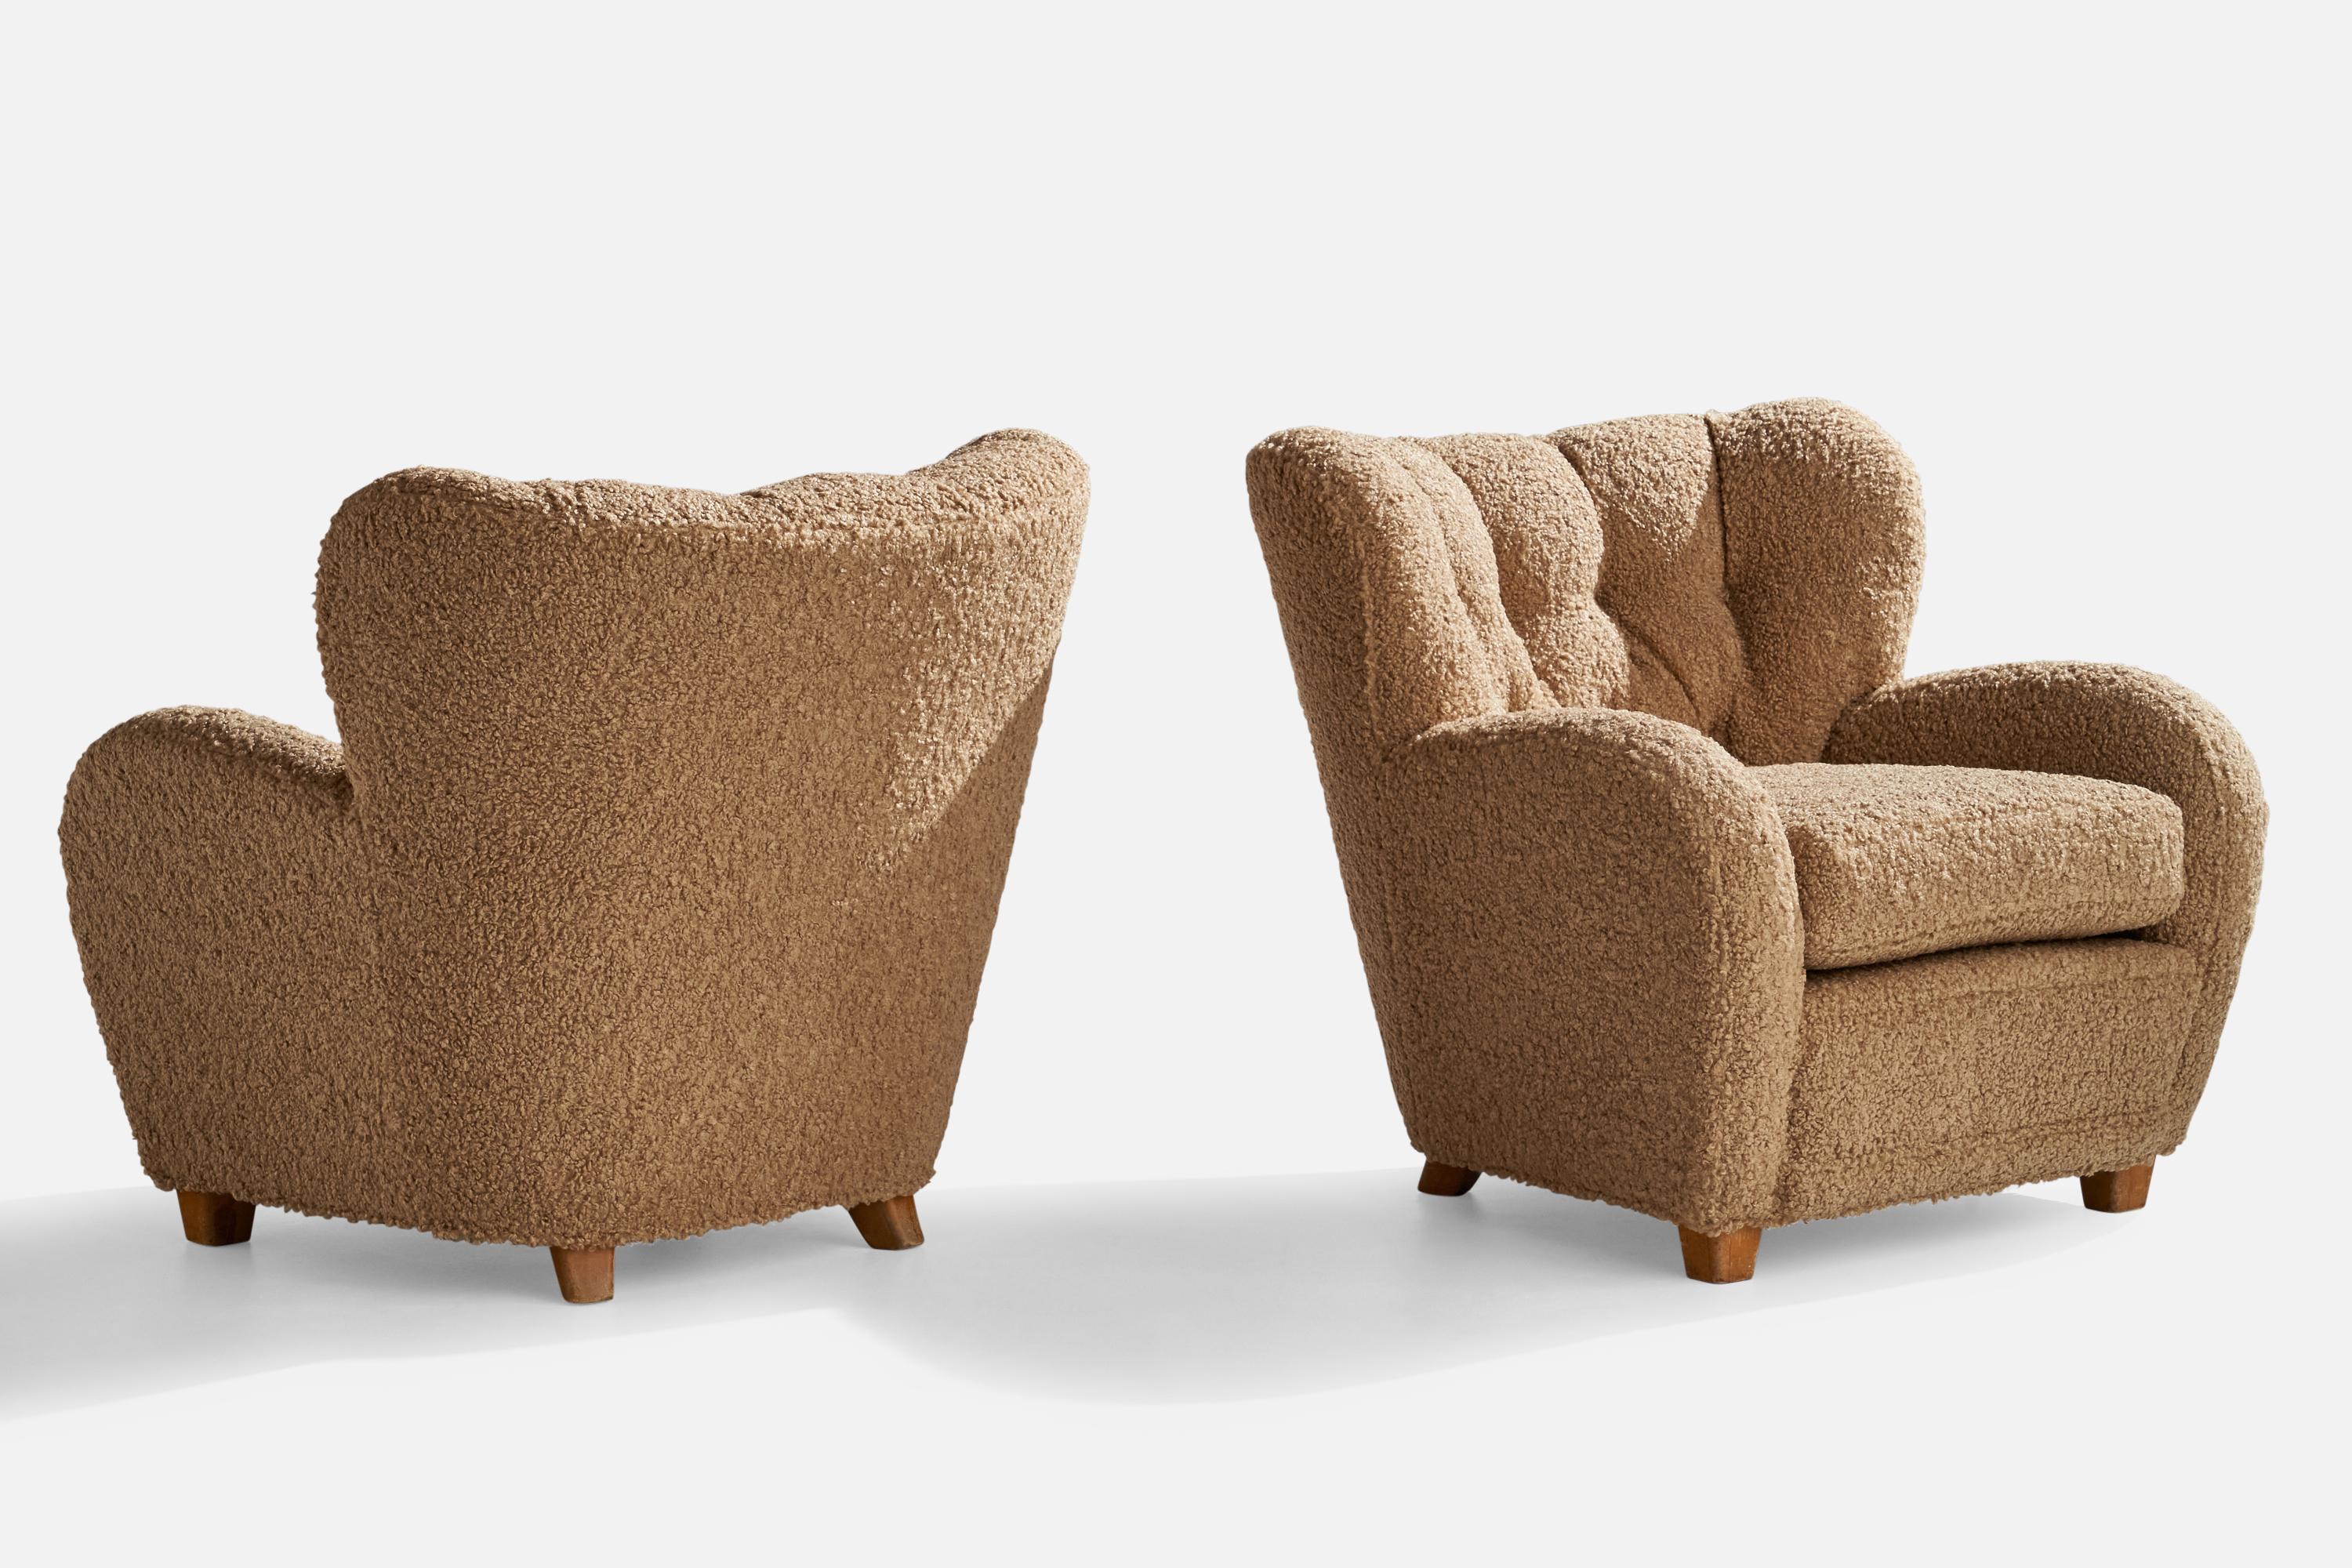 A pair of brown beige bouclé fabric and dark-stained birch lounge chairs designed and produced in Finland, 1940s.

Seat height: 18”